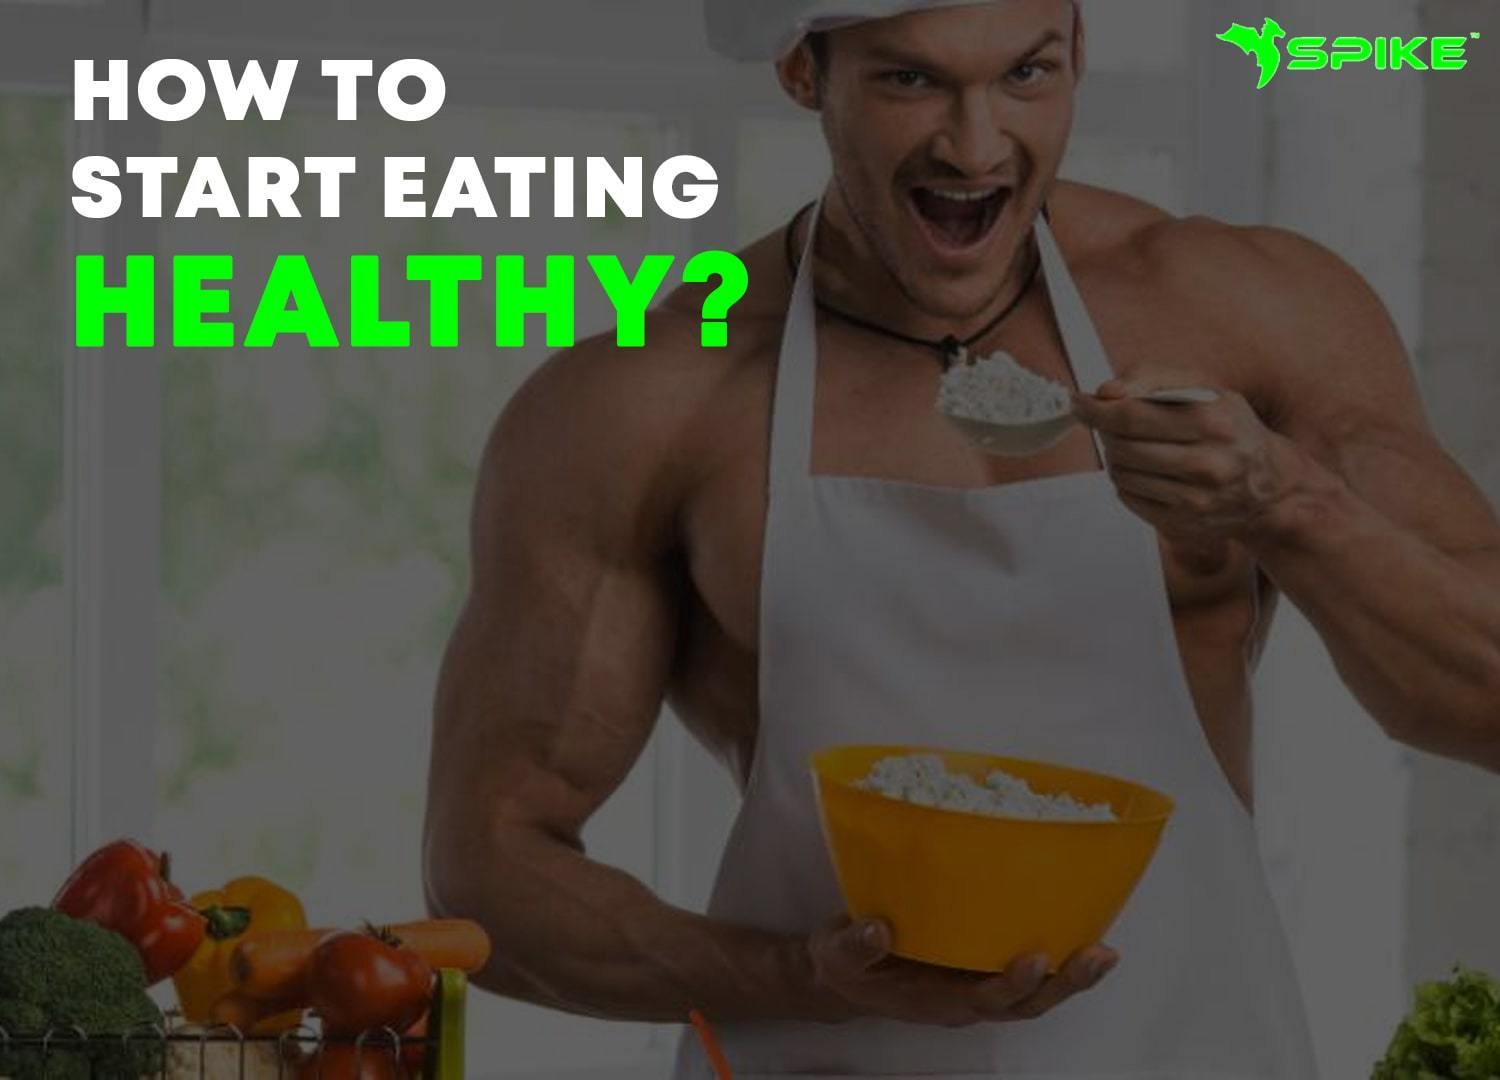 HOW TO START EATING HEALTHY - Spike